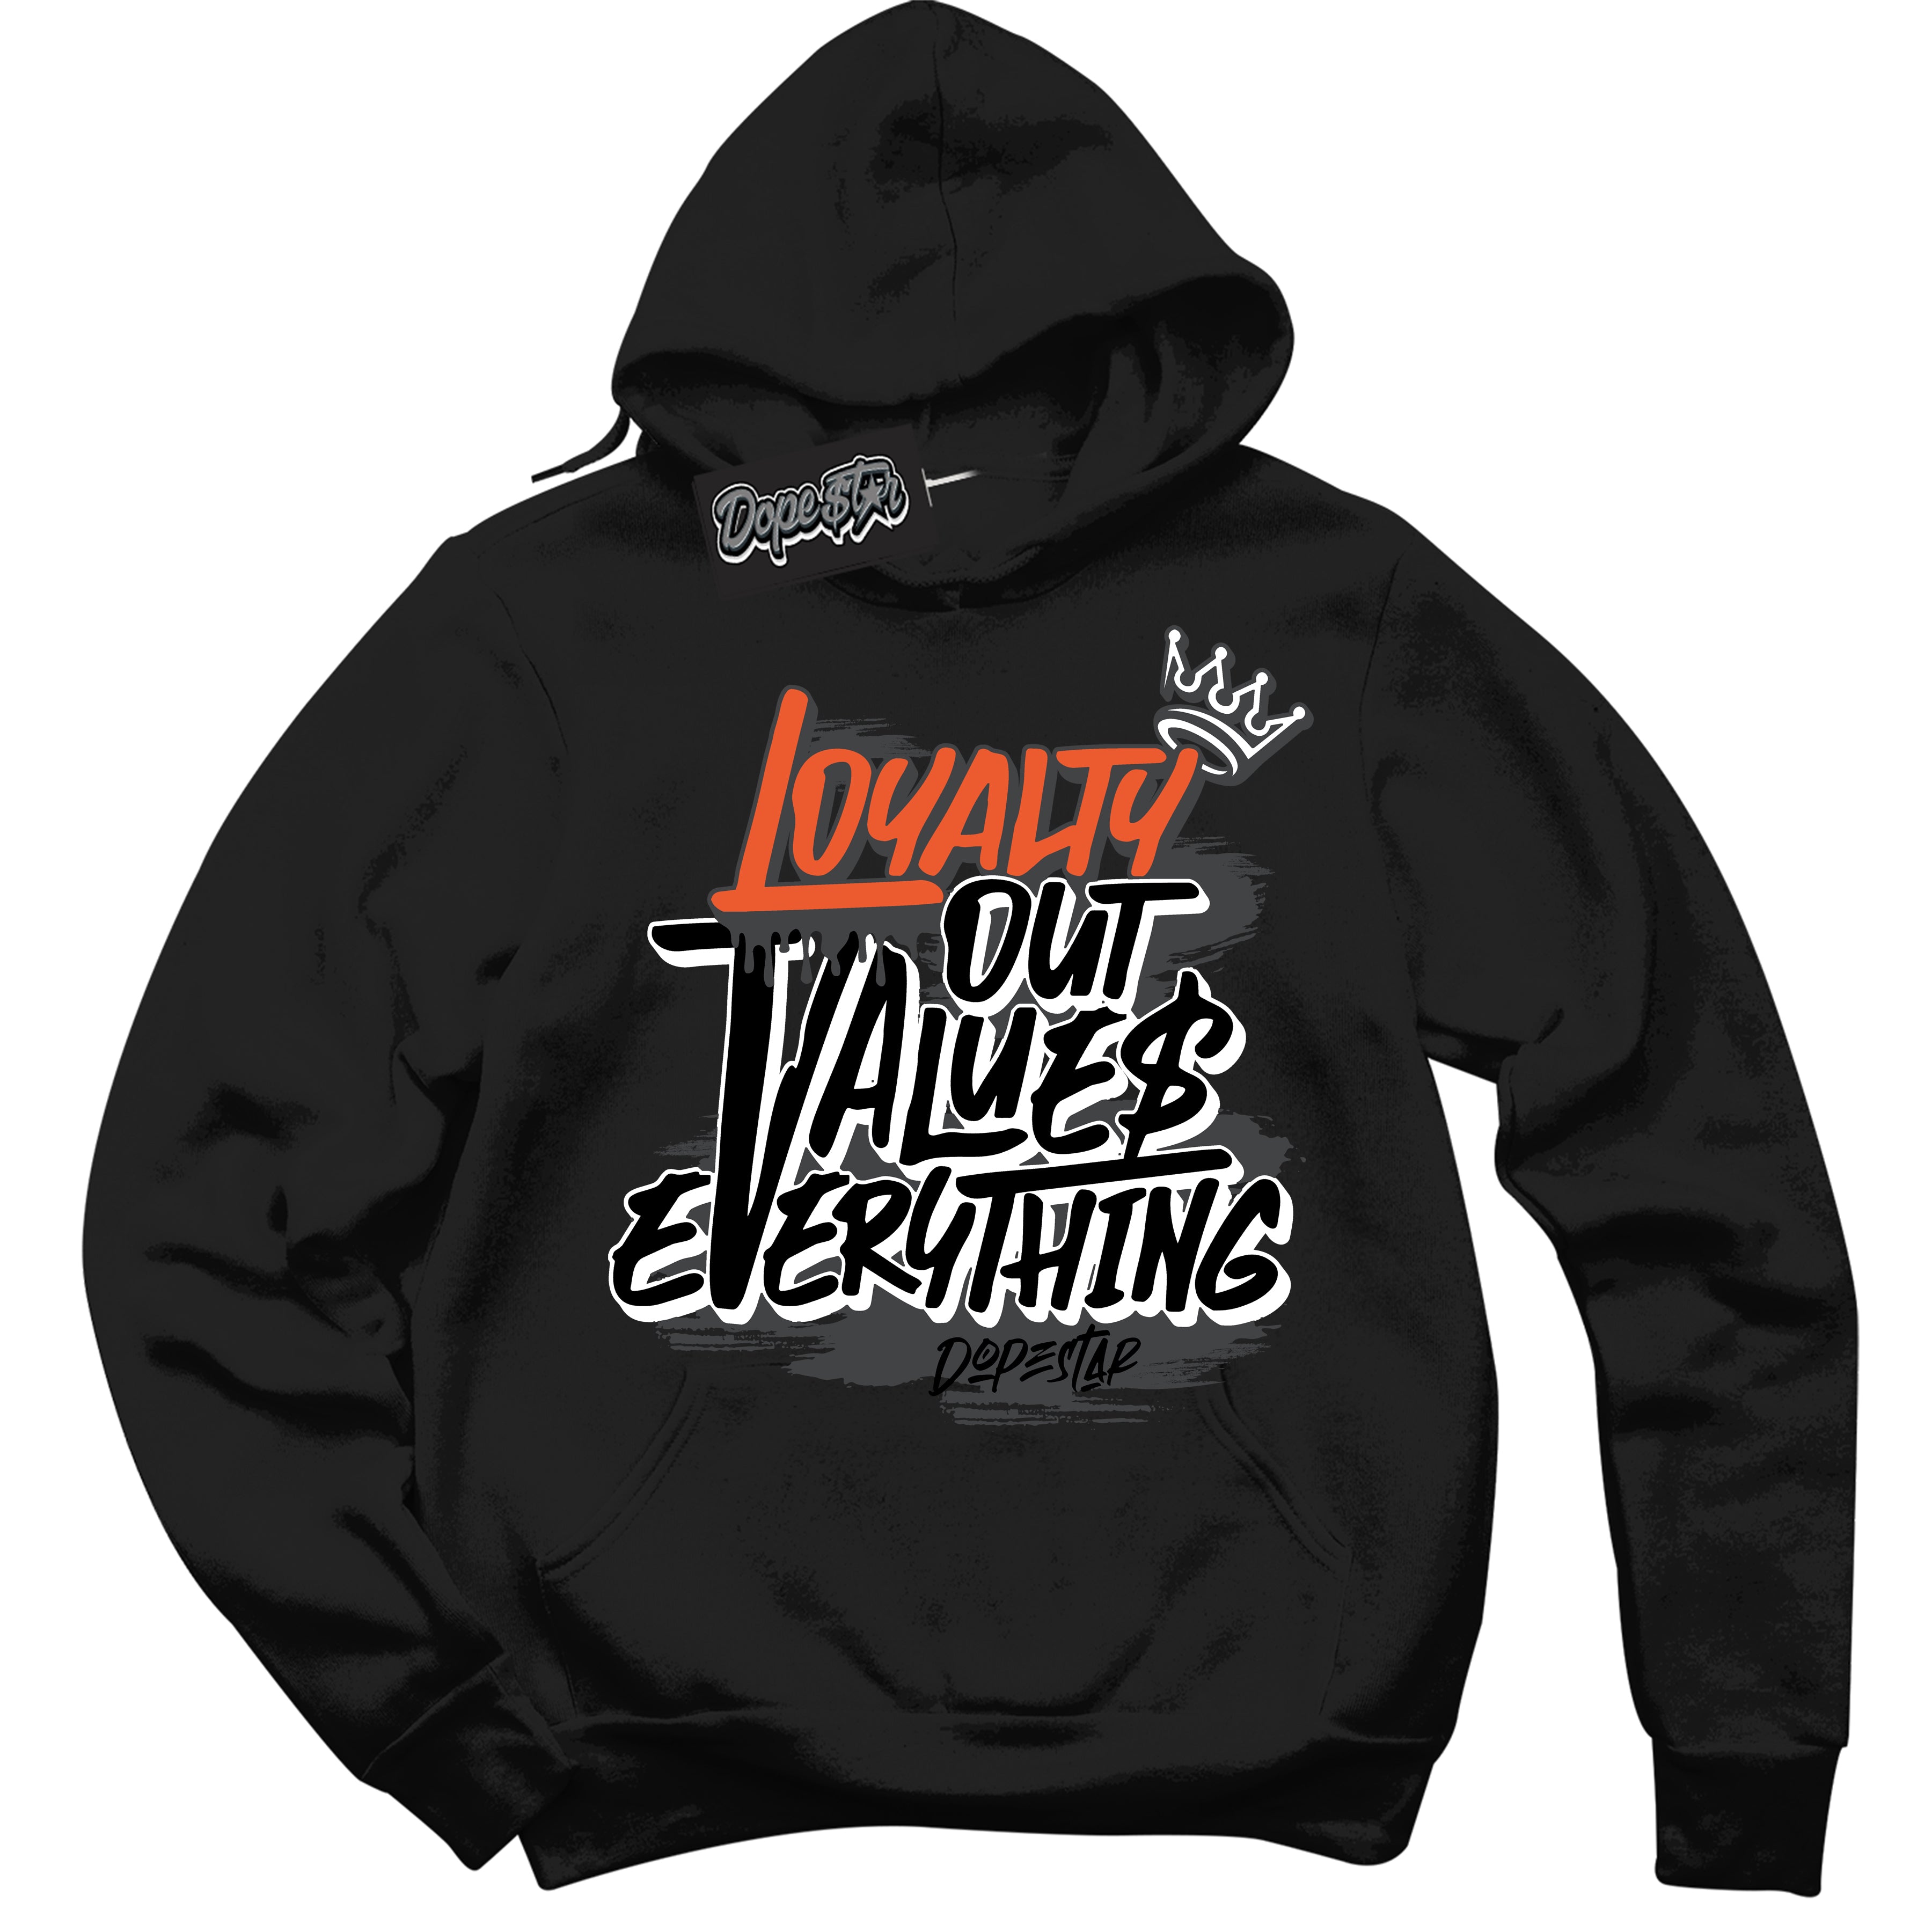 Cool Black Hoodie with “ Loyalty Out Values Everything ”  design that Perfectly Matches  Stash 1s Sneakers.